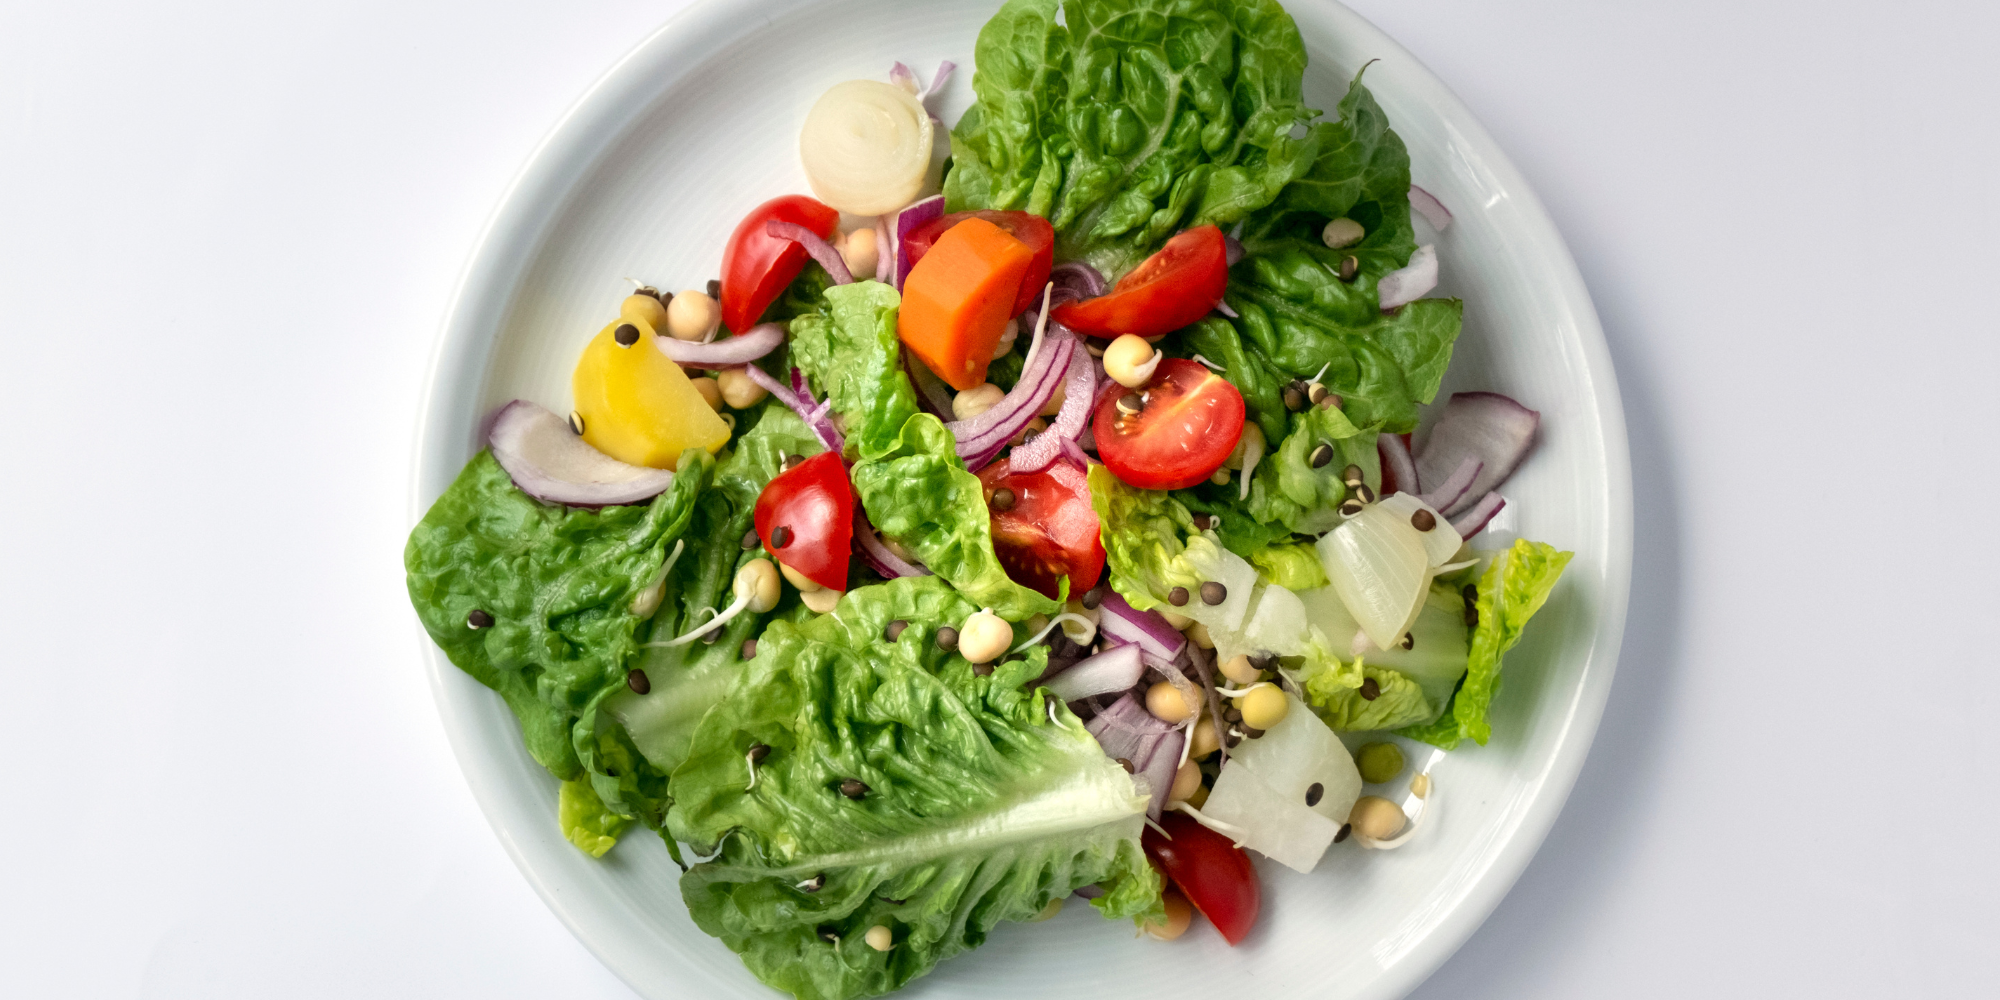 White plate with raised edges against a white background. On the plate are a variety of leafy greens, grains, other vegetables and some cut strawberries